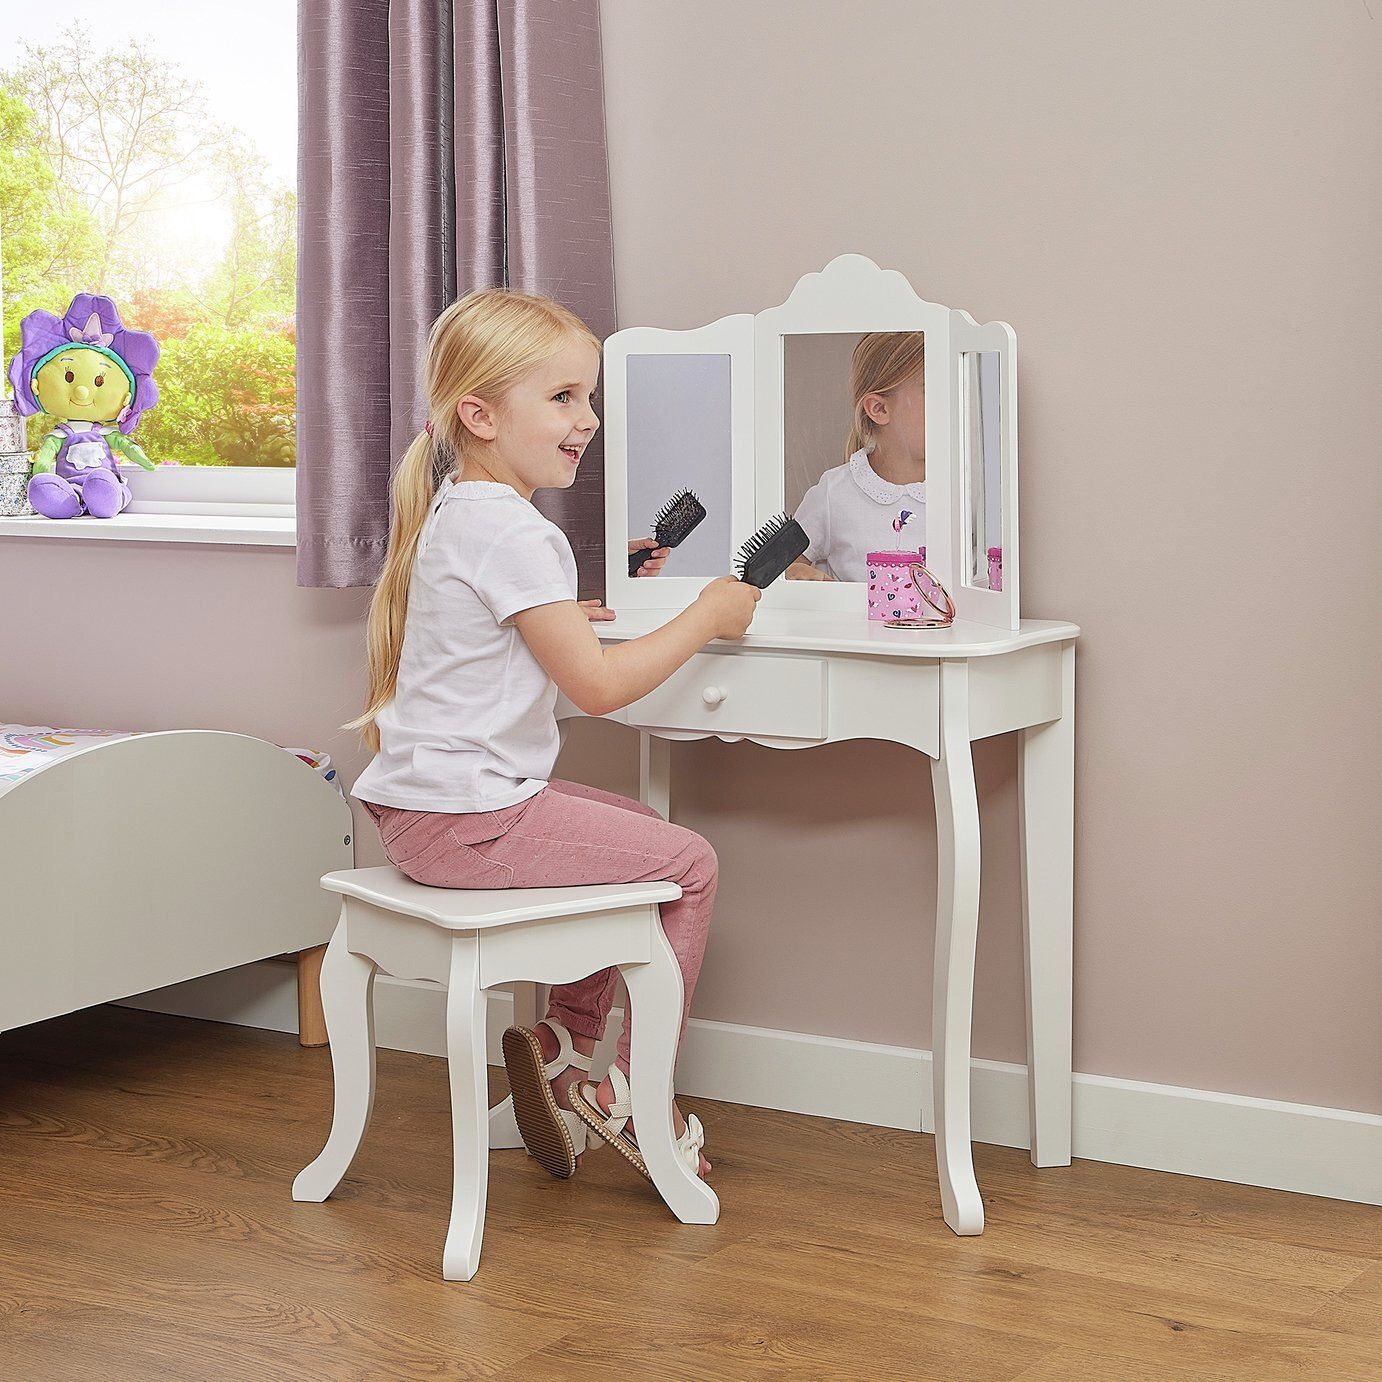 Liberty House Kids Dressing Table And Stool - White - image 1